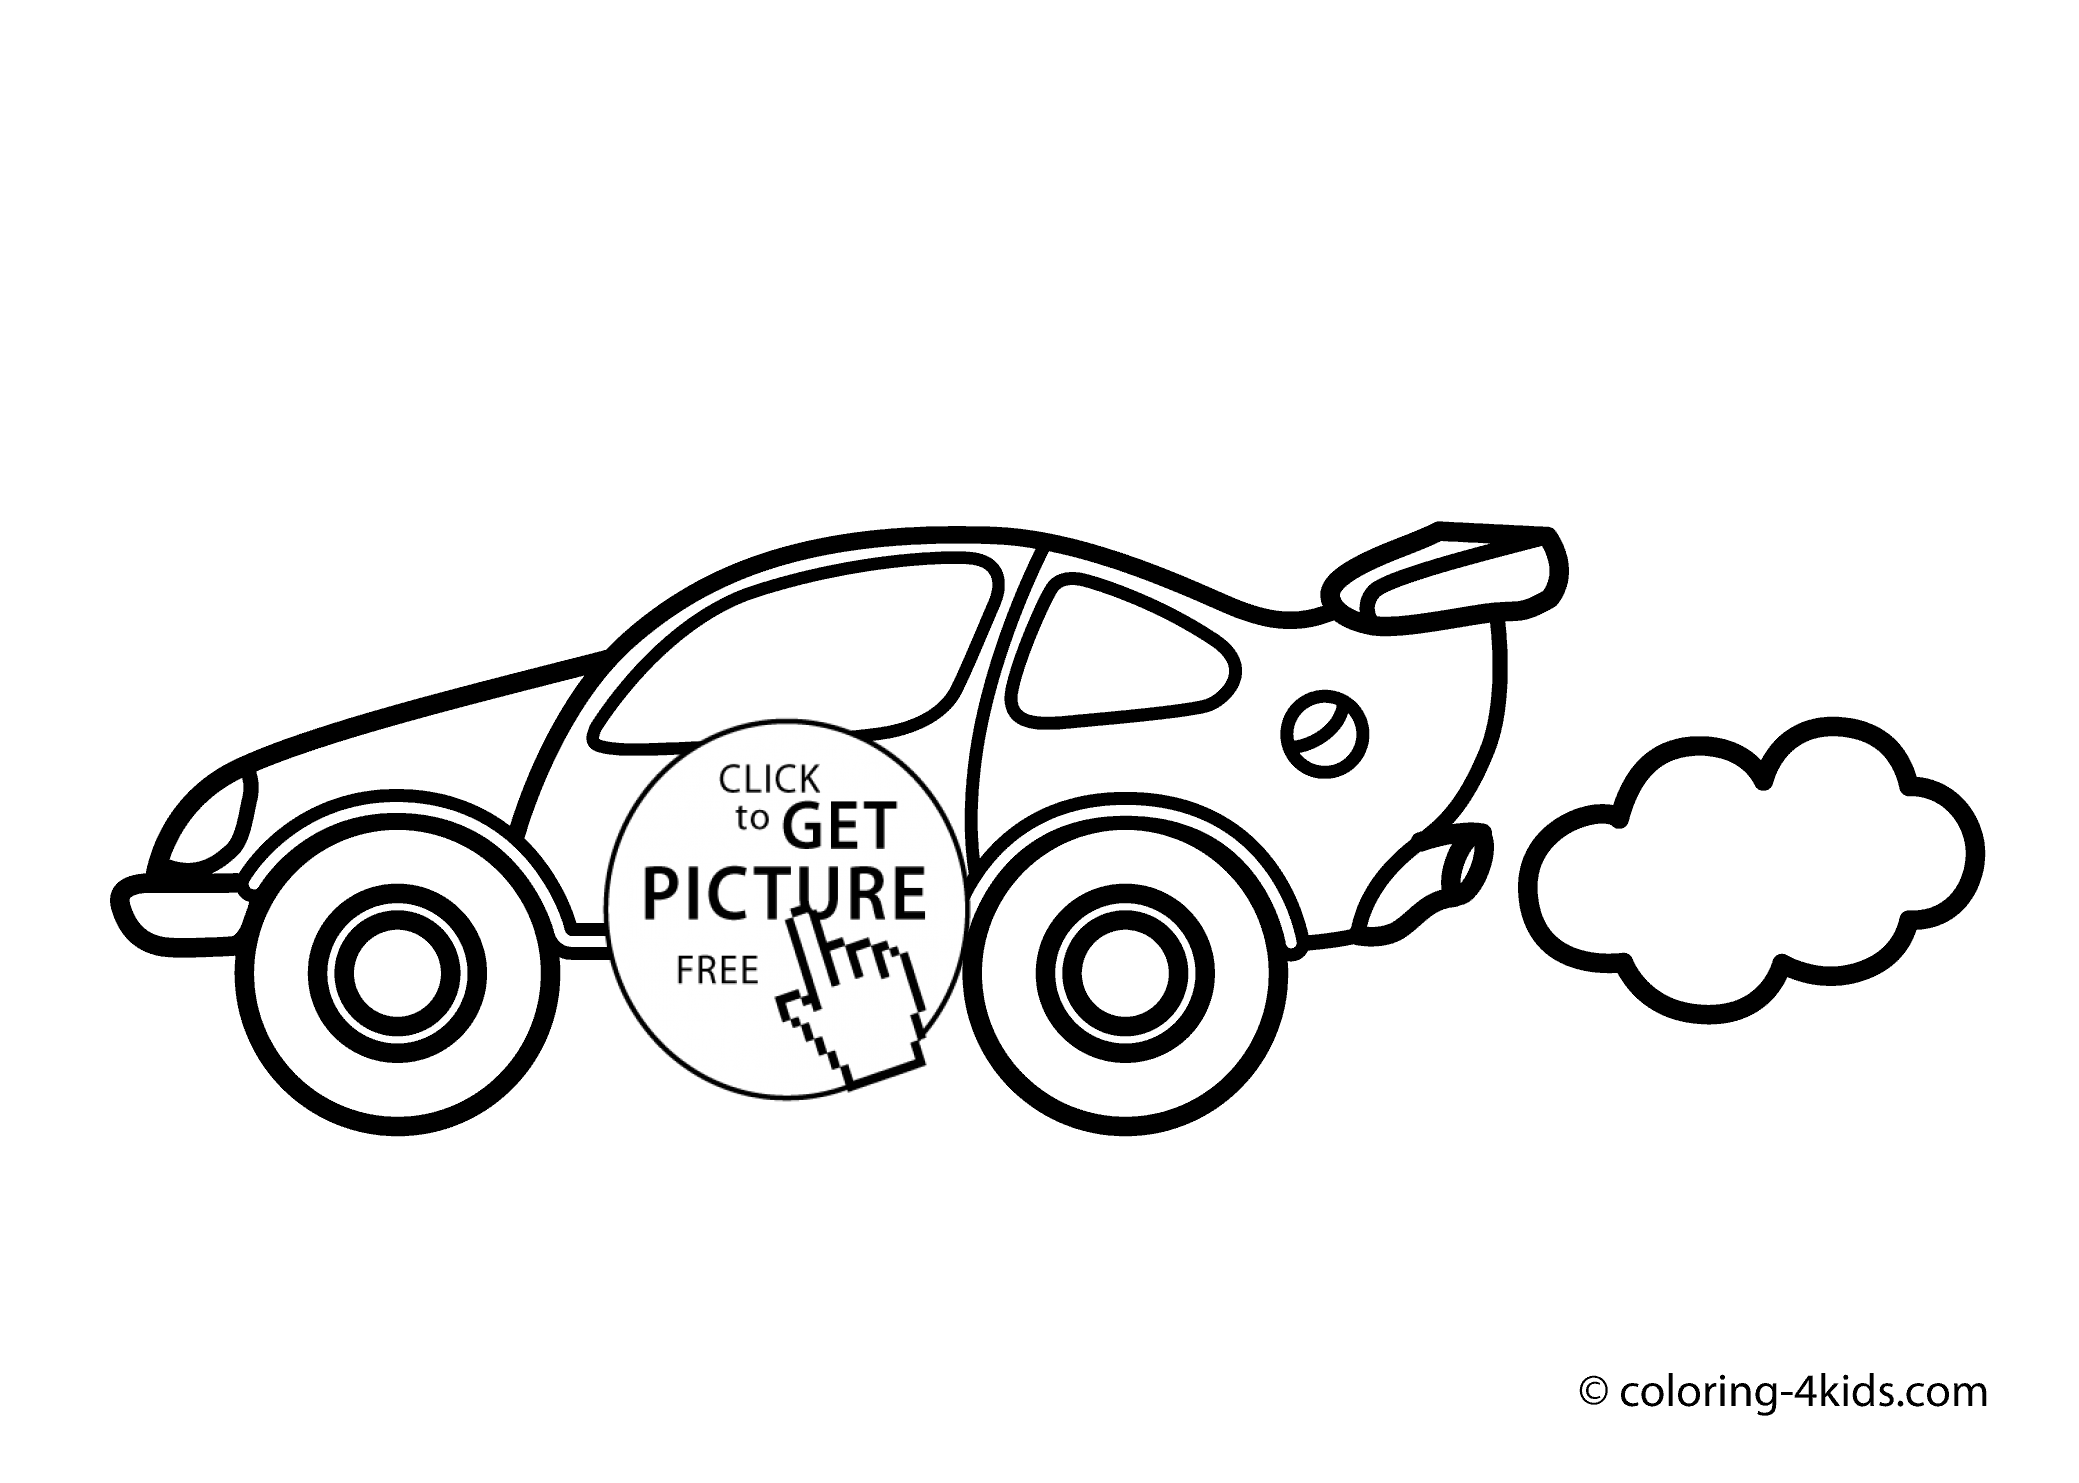 Cool Car coloring pages for kids, printable speed car | coloing ...